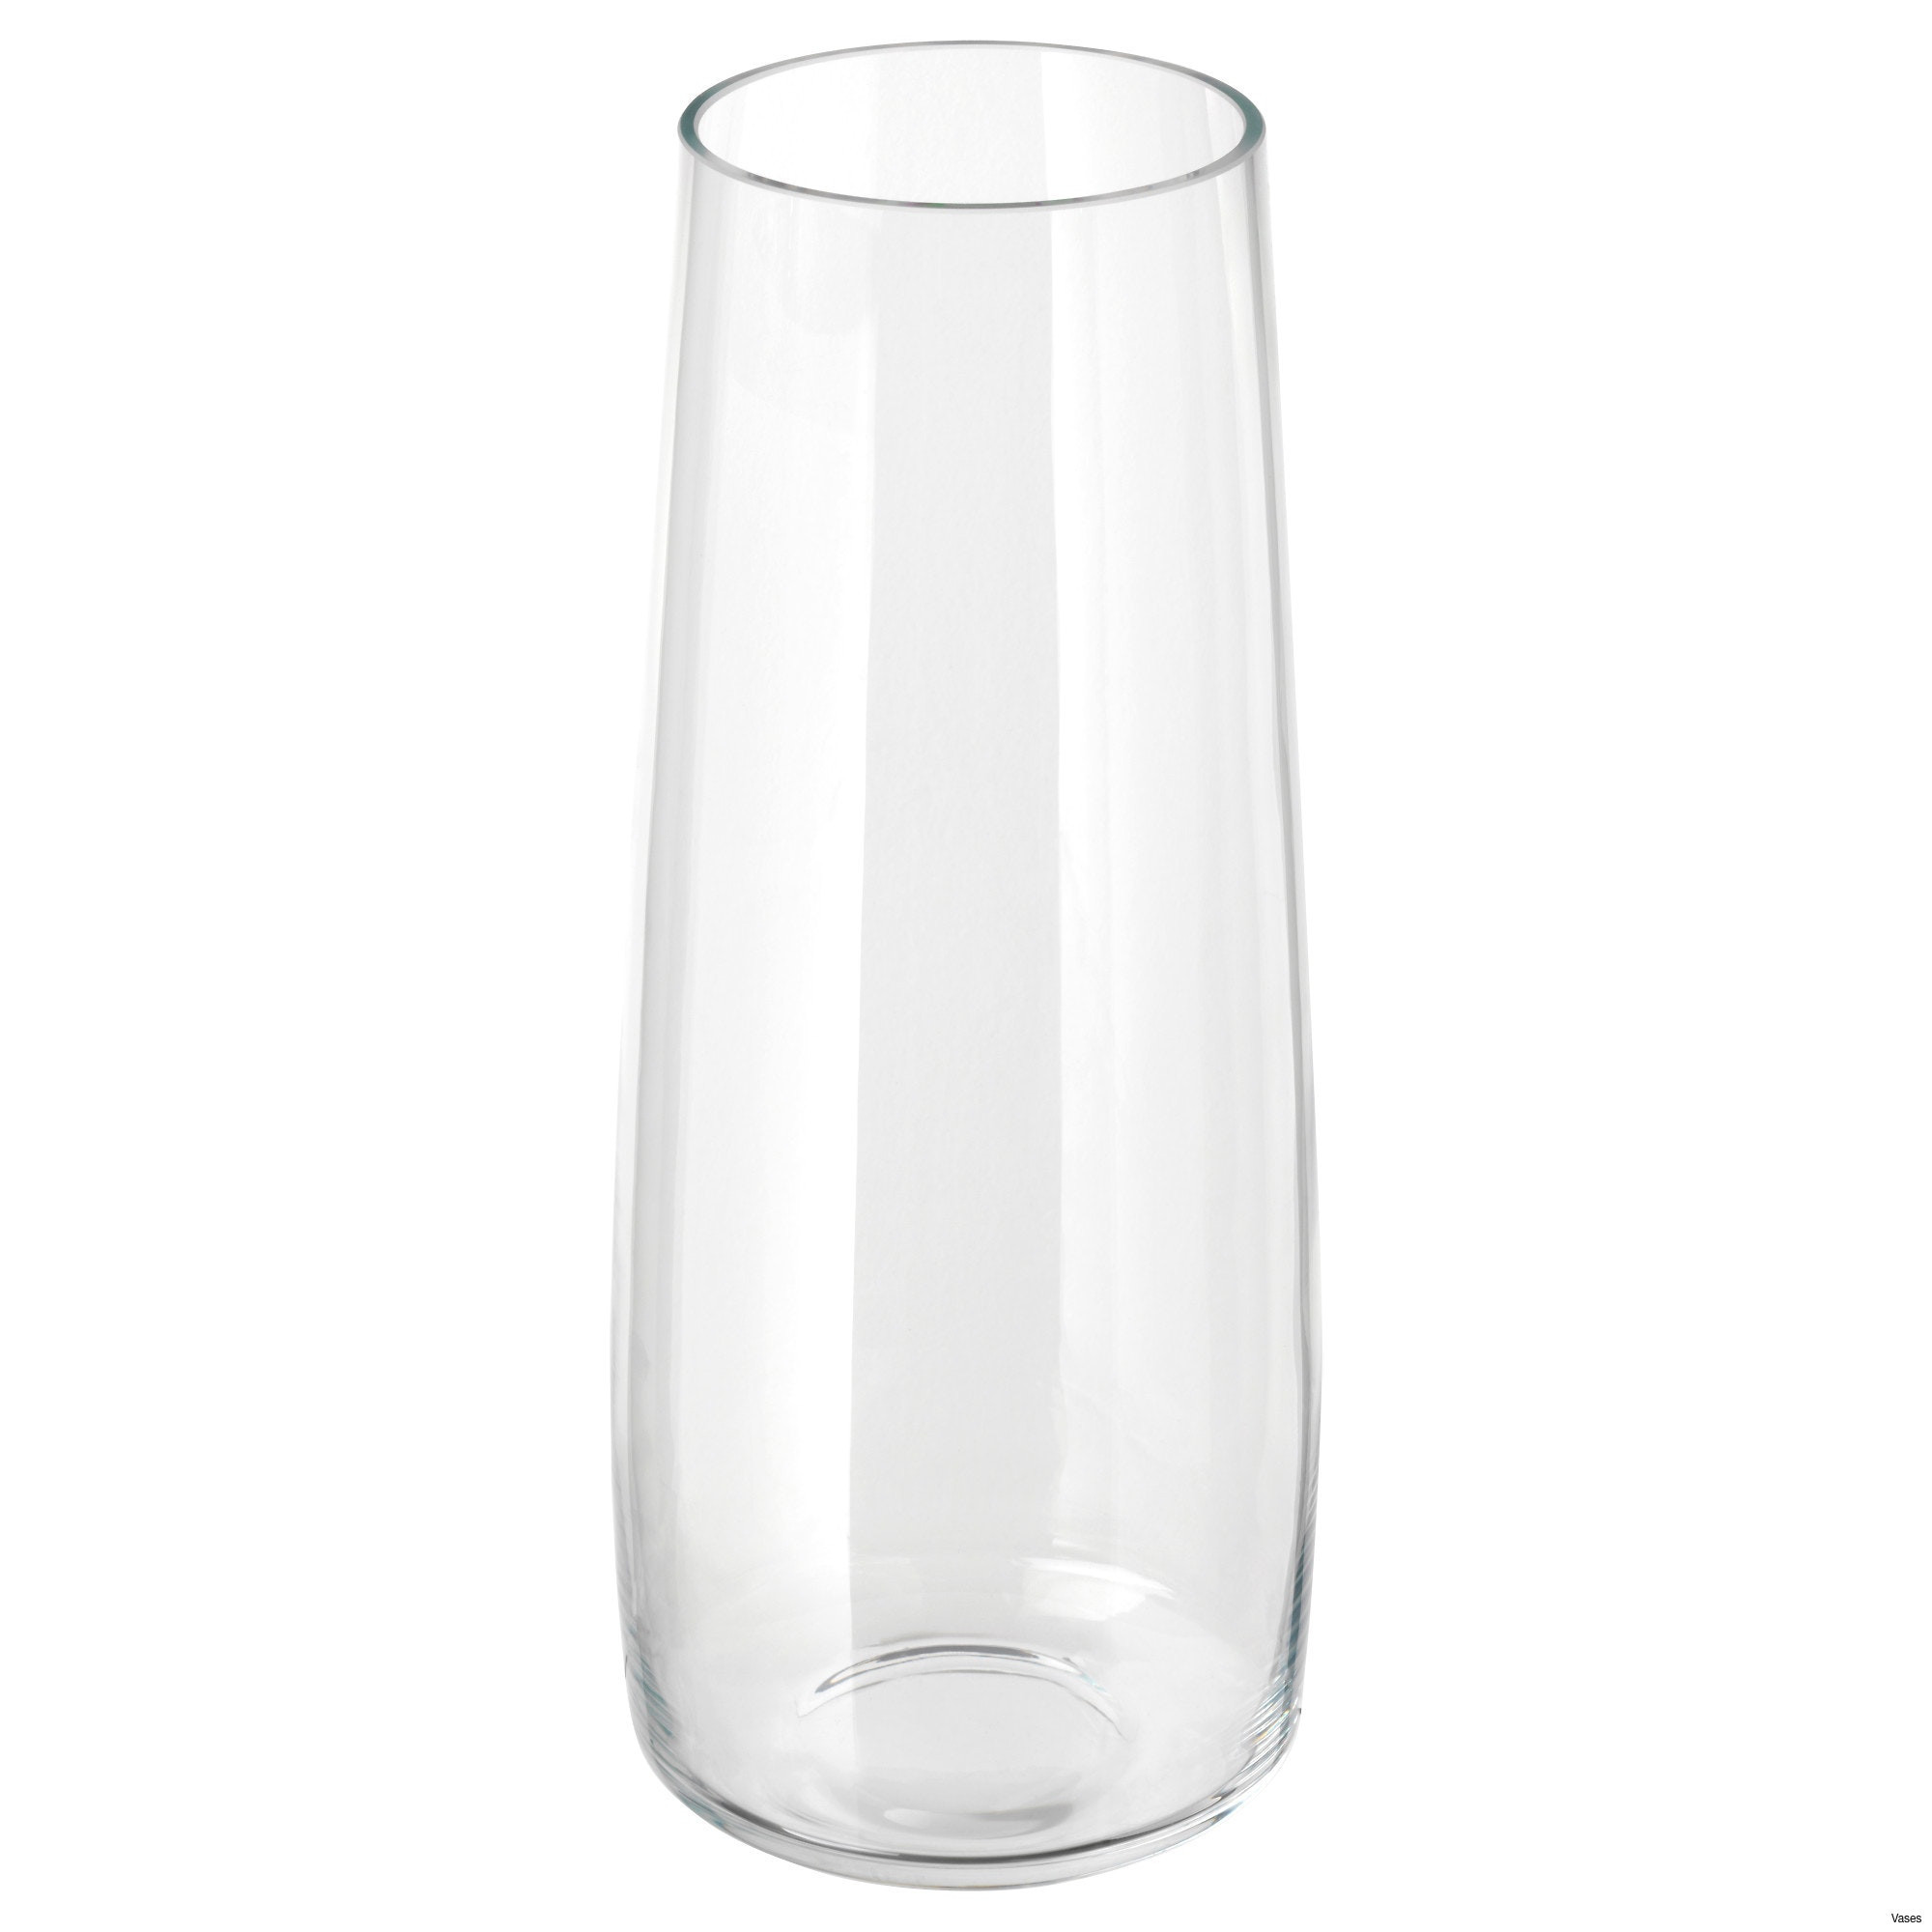 30 attractive Glass Pitcher Vase 2022 free download glass pitcher vase of large clear glass vase photos clear glass vases vases artificial inside large clear glass vase pics clear glass planters fresh clear glass vases of large clear glass